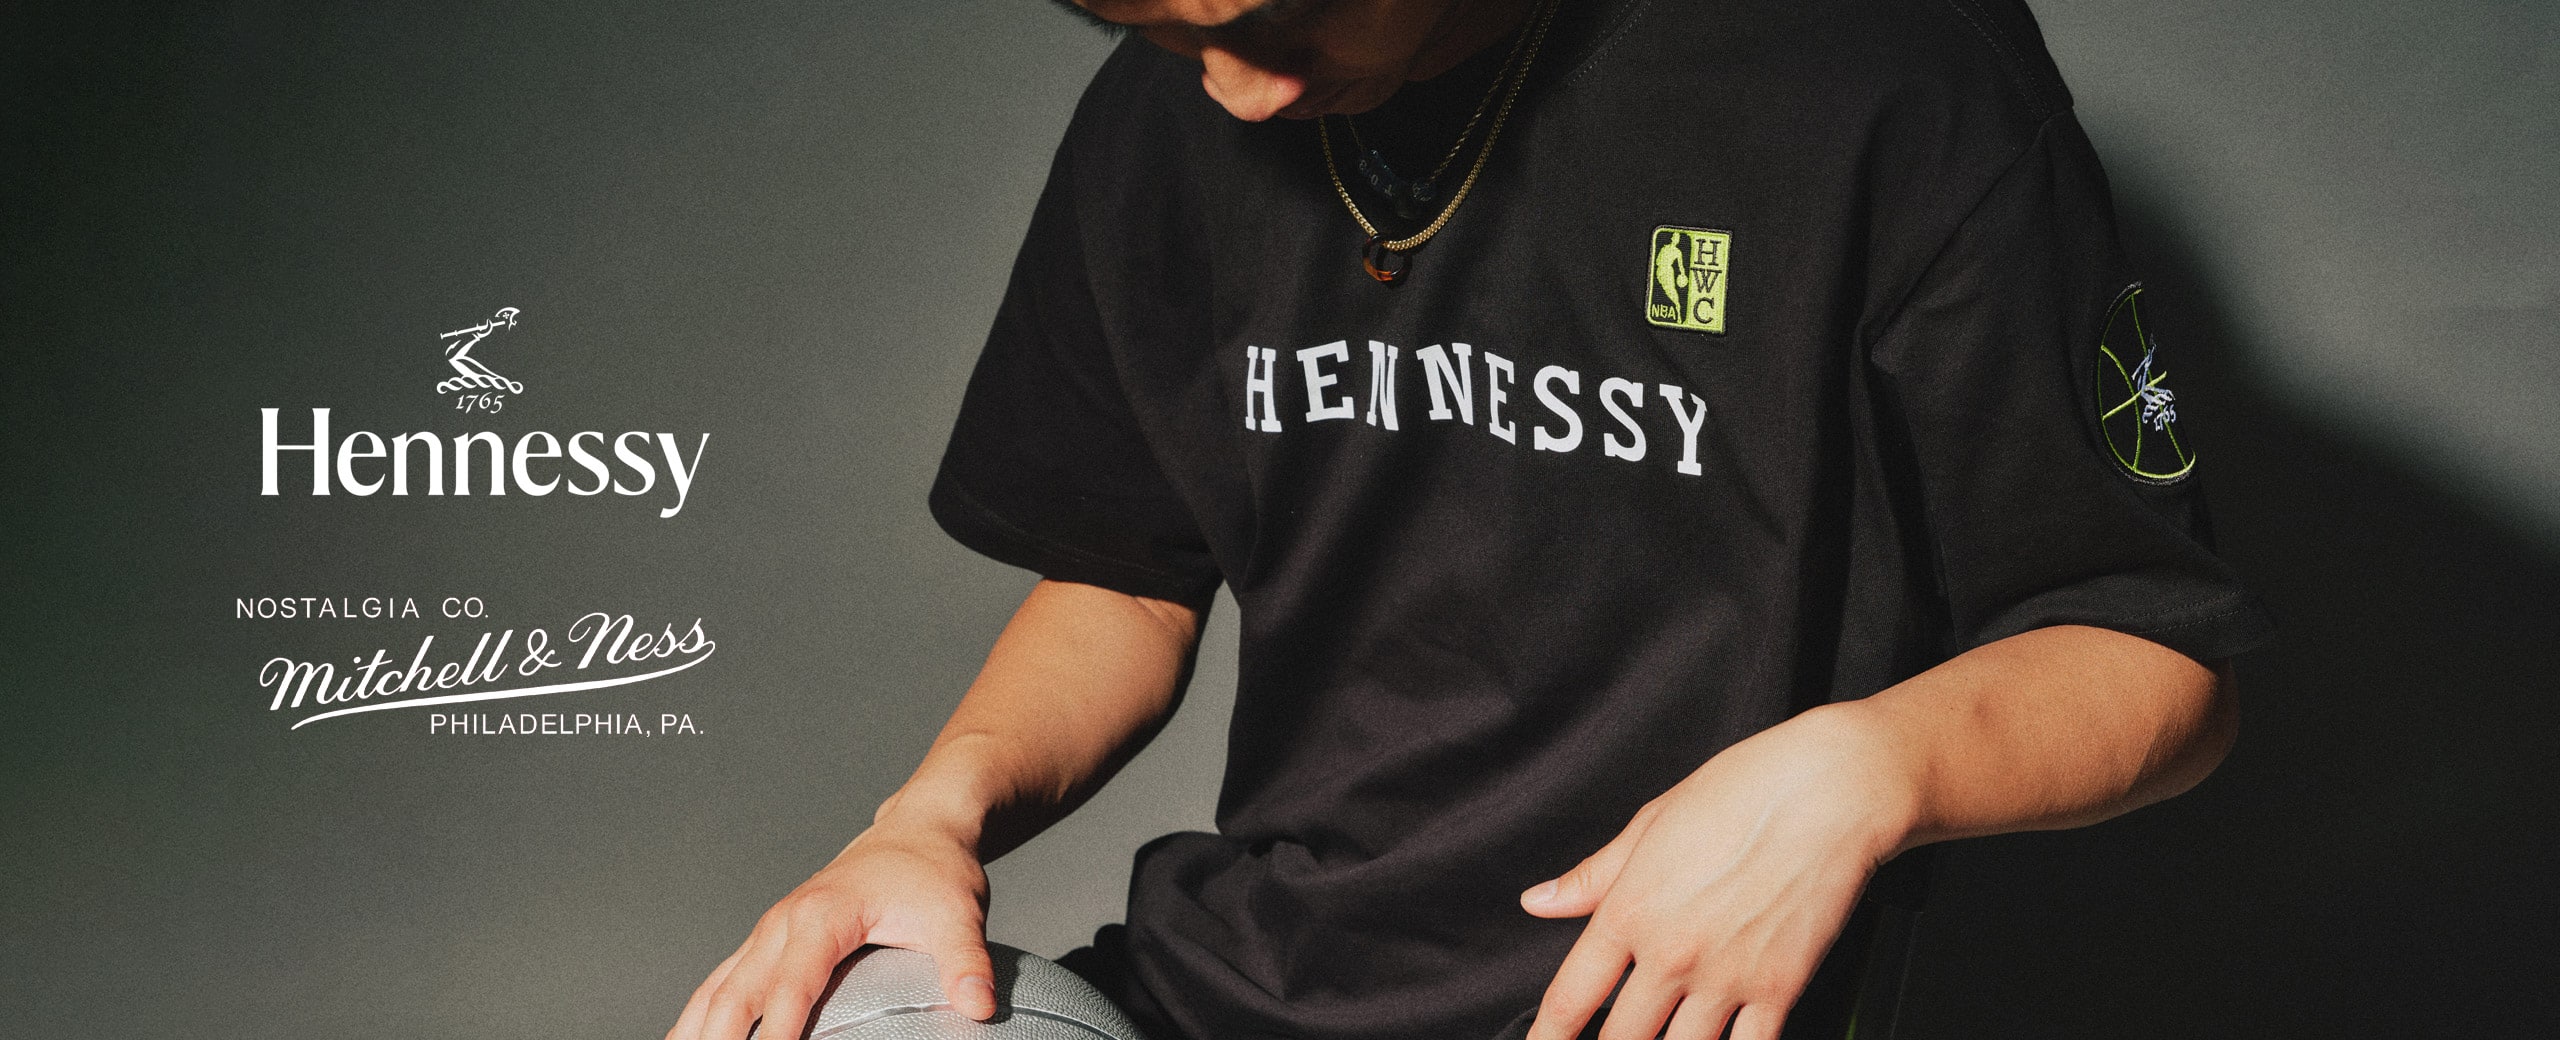 "Mitchell & Ness NBA HENNESSY Collection"